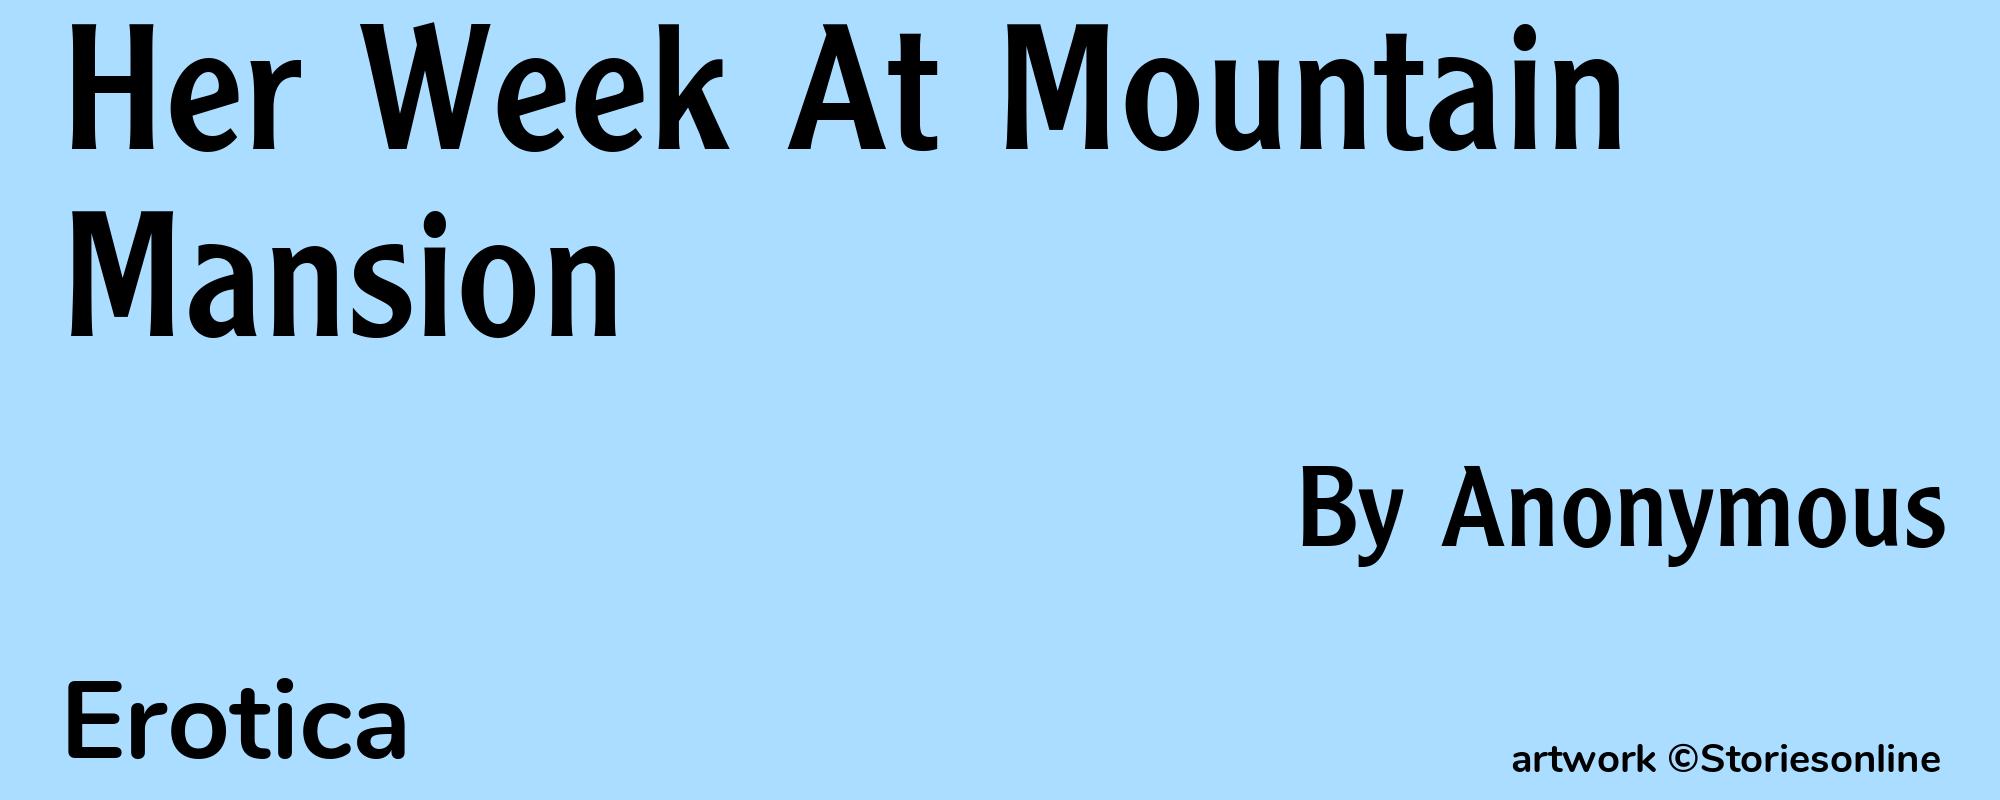 Her Week At Mountain Mansion - Cover